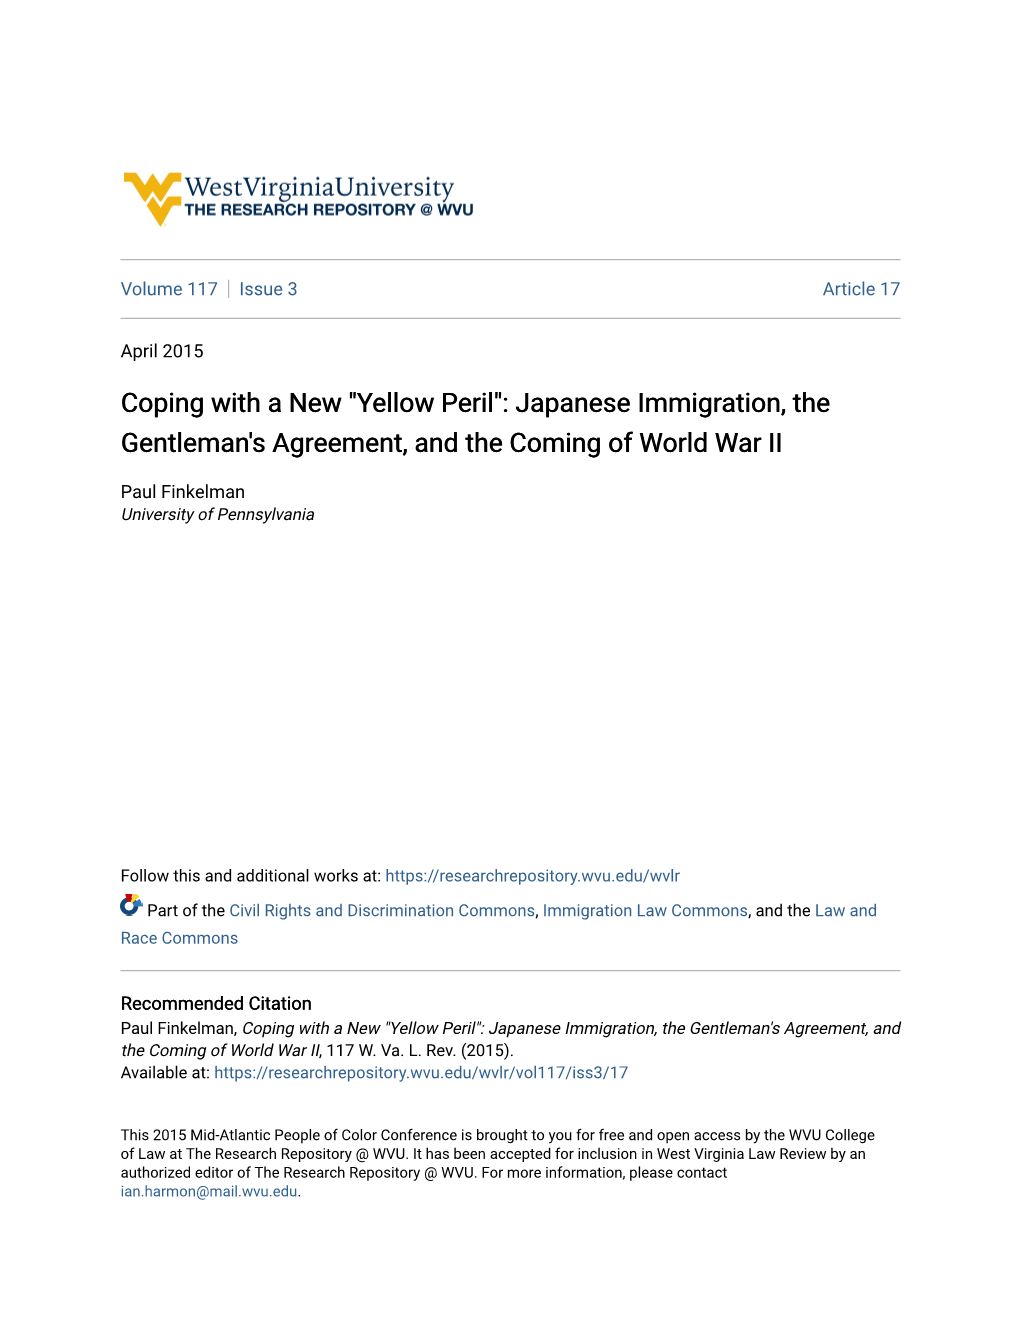 Yellow Peril": Japanese Immigration, the Gentleman's Agreement, and the Coming of World War II